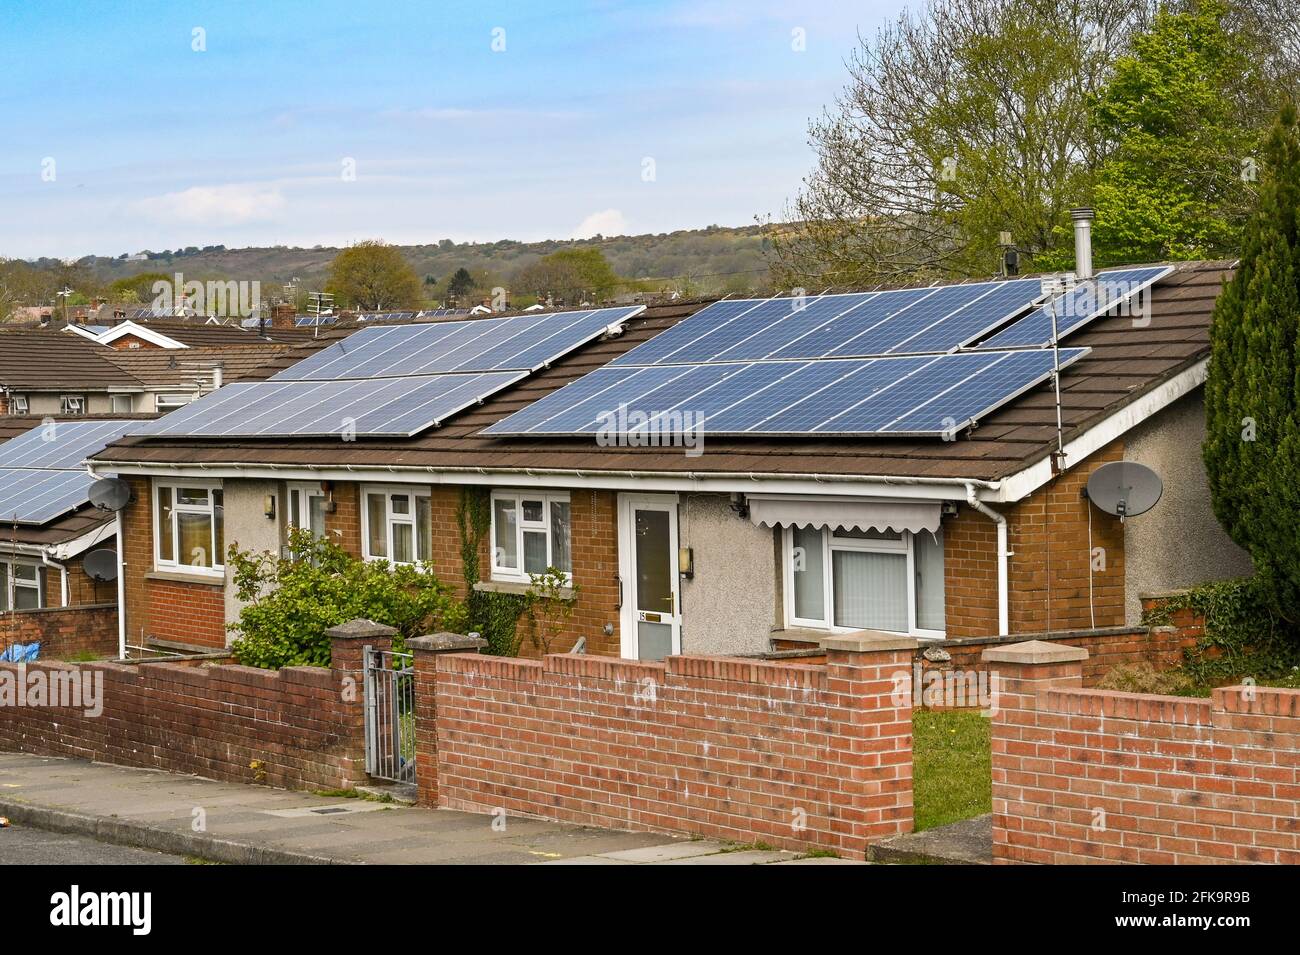 Bridgend, Wales - April 2021: Front exterior view of a pair of bungalows fitted with solar panels on the roof. Stock Photo